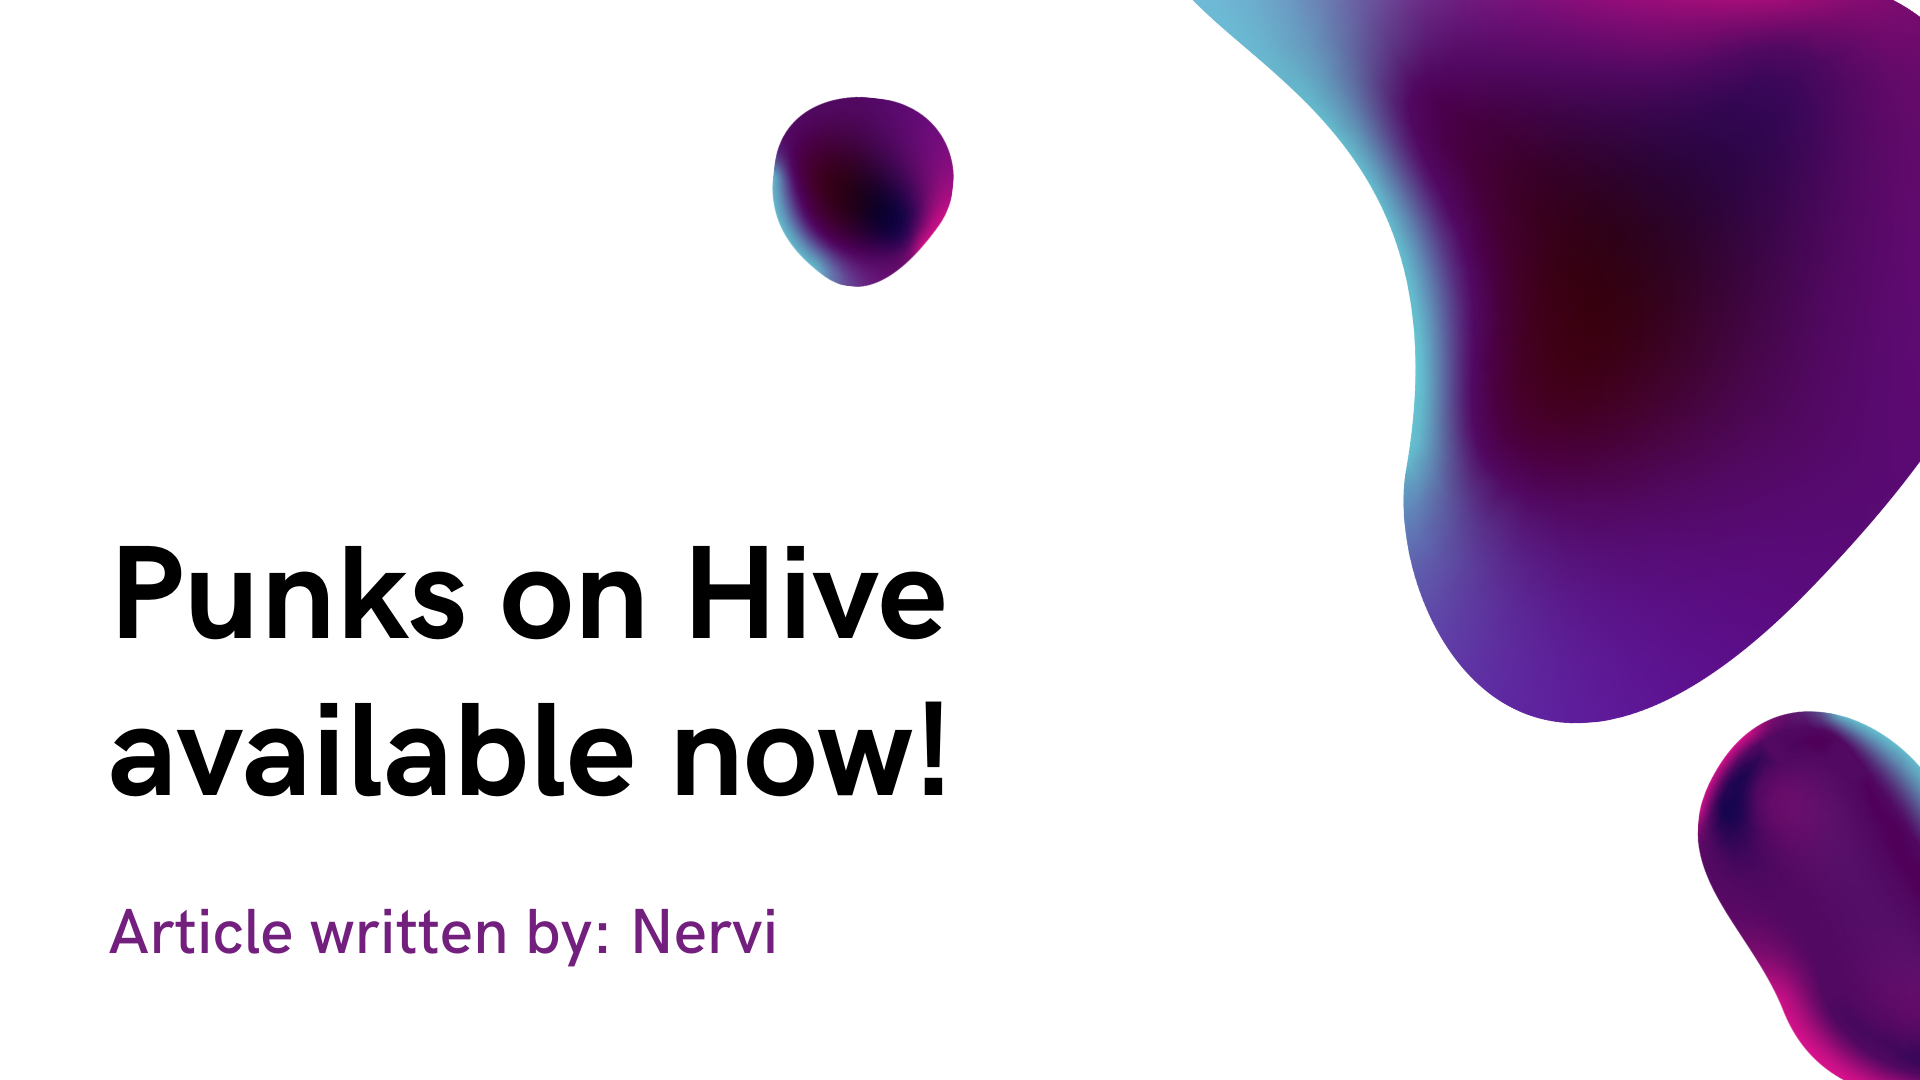 @nervi/punks-on-hive-available-now